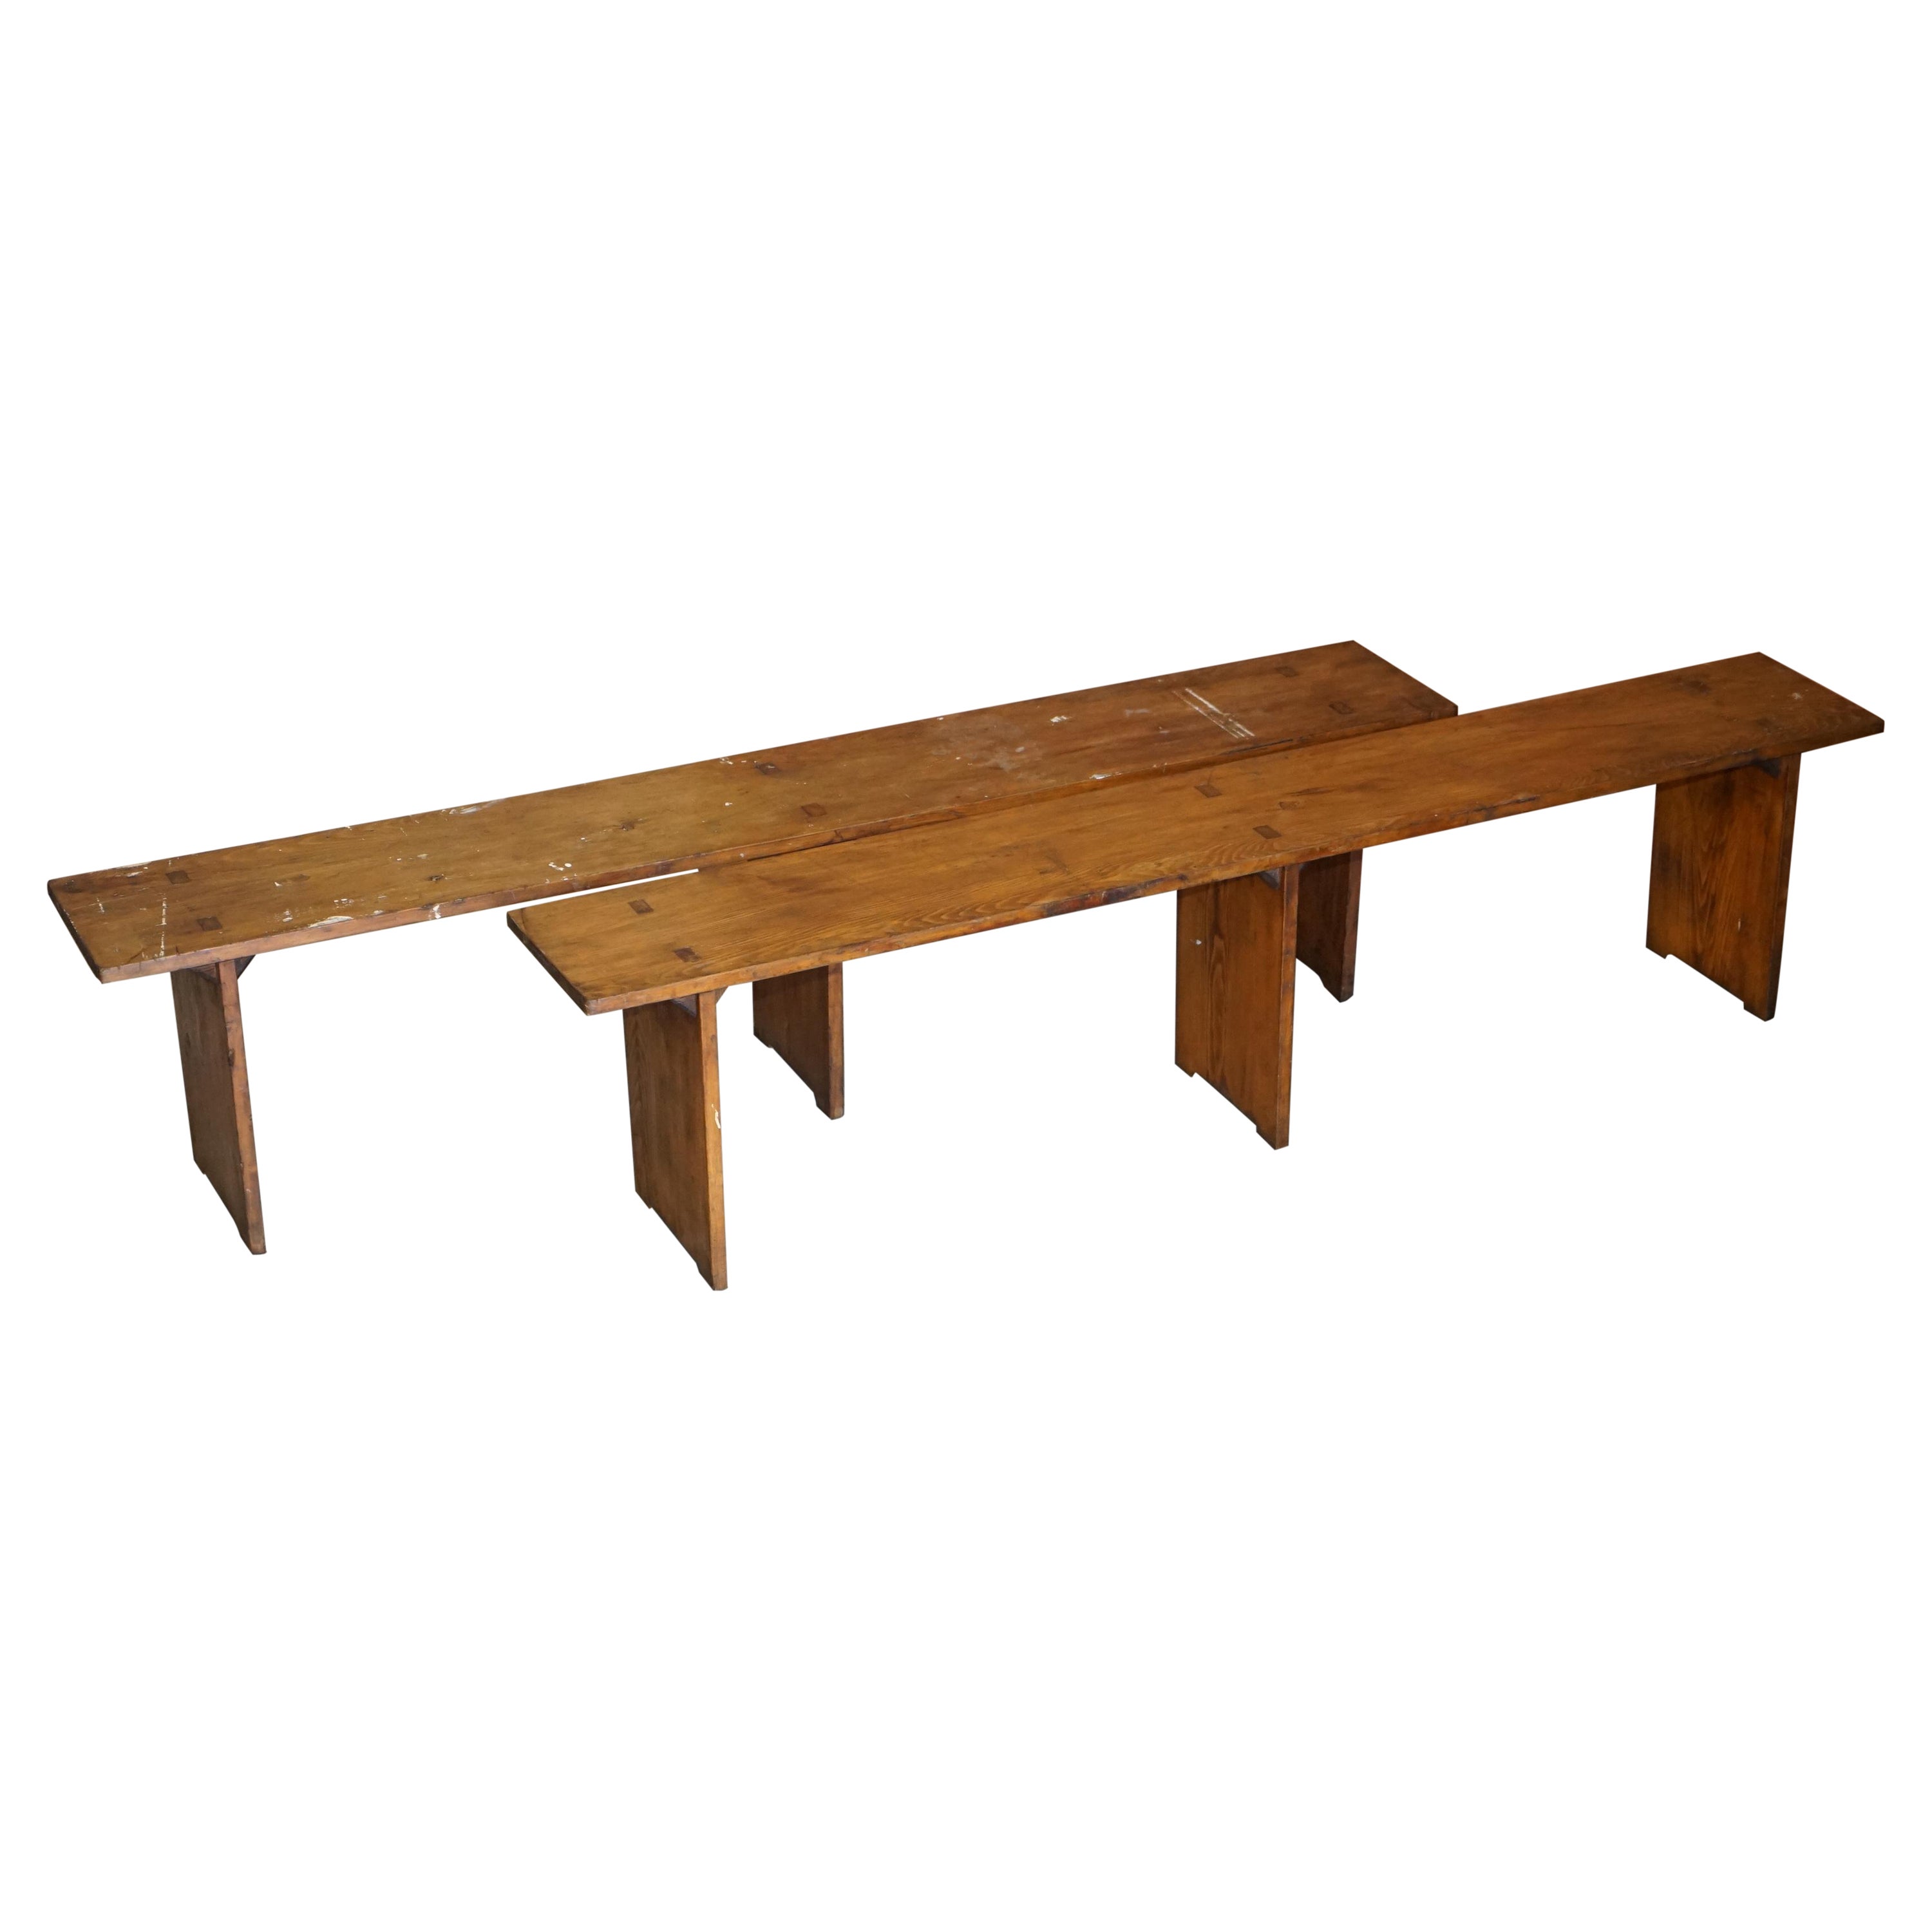 Pair of Lovely Vintage Pitch Pine Benches / Seats for a Refecorty Dining Table